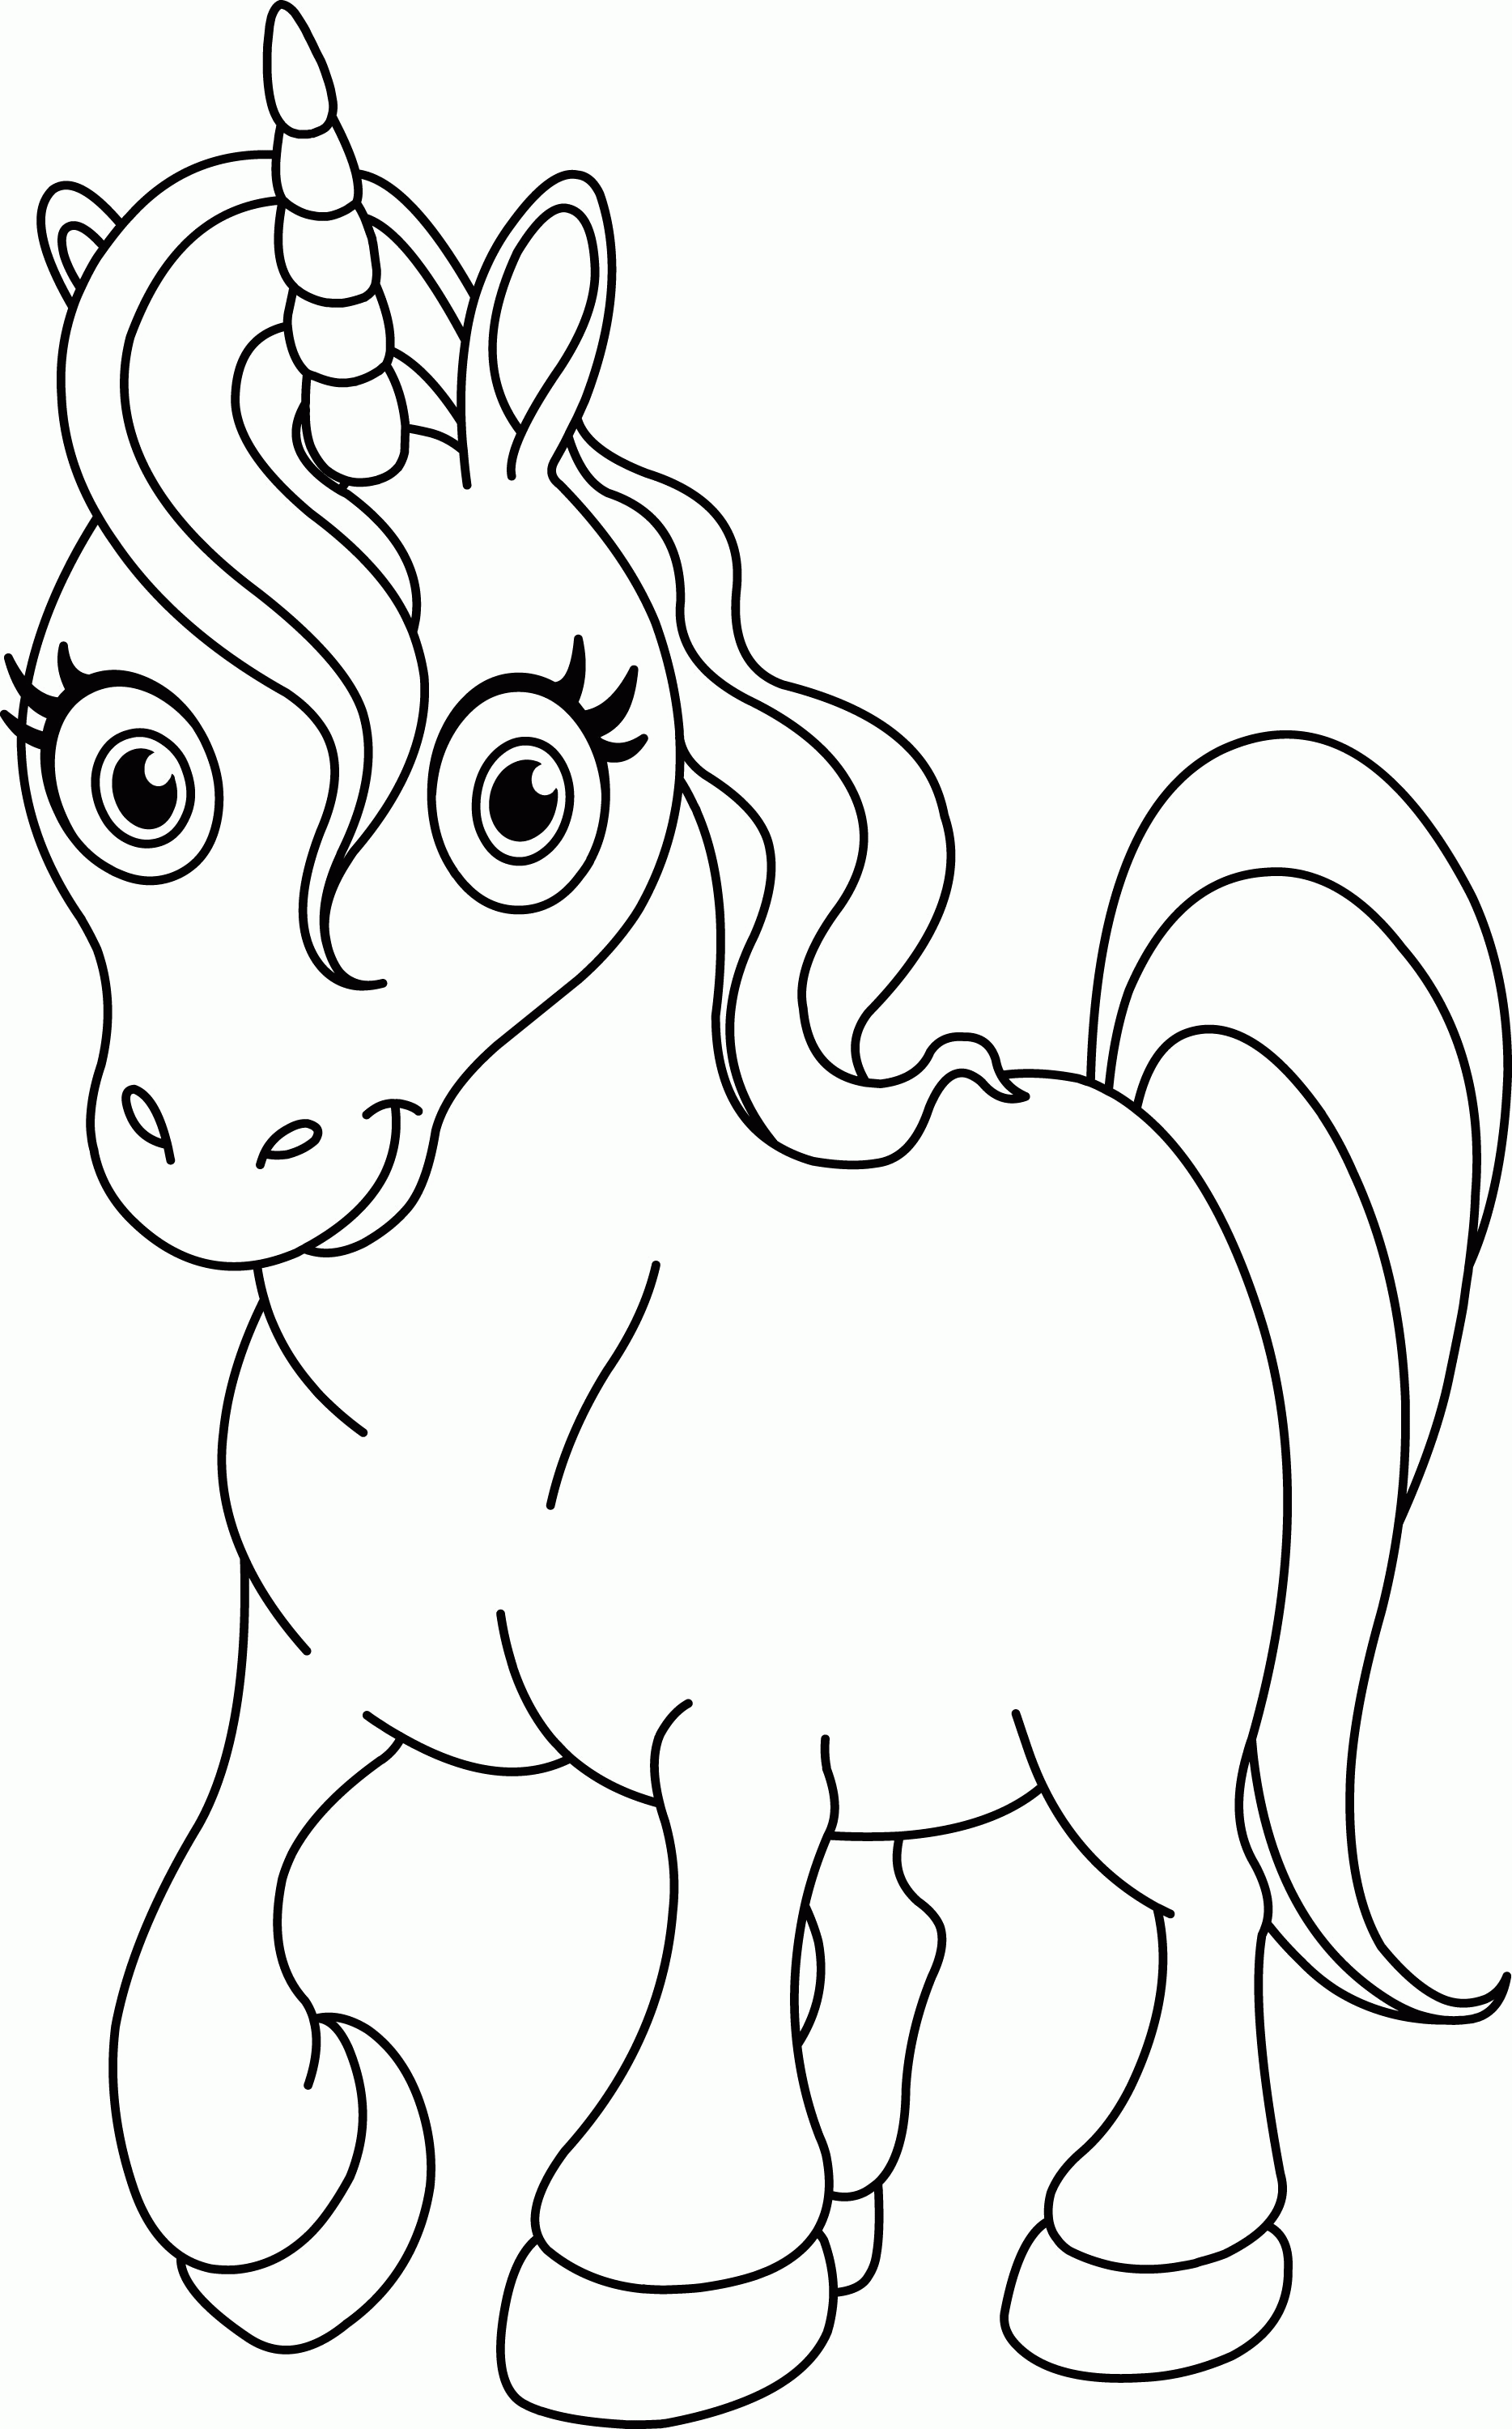 Unicorn And Rainbow Coloring Pages - Coloring Page